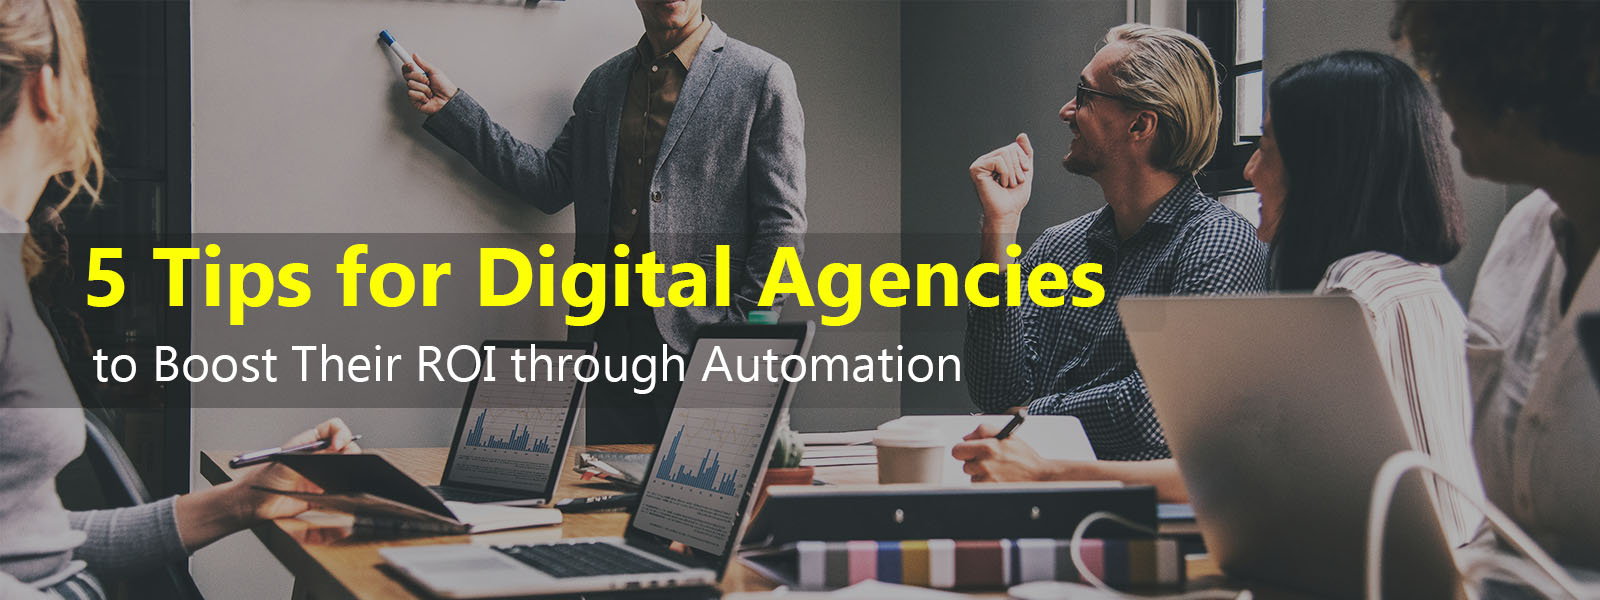 5 tips for digital agencies to boost their roi through automation